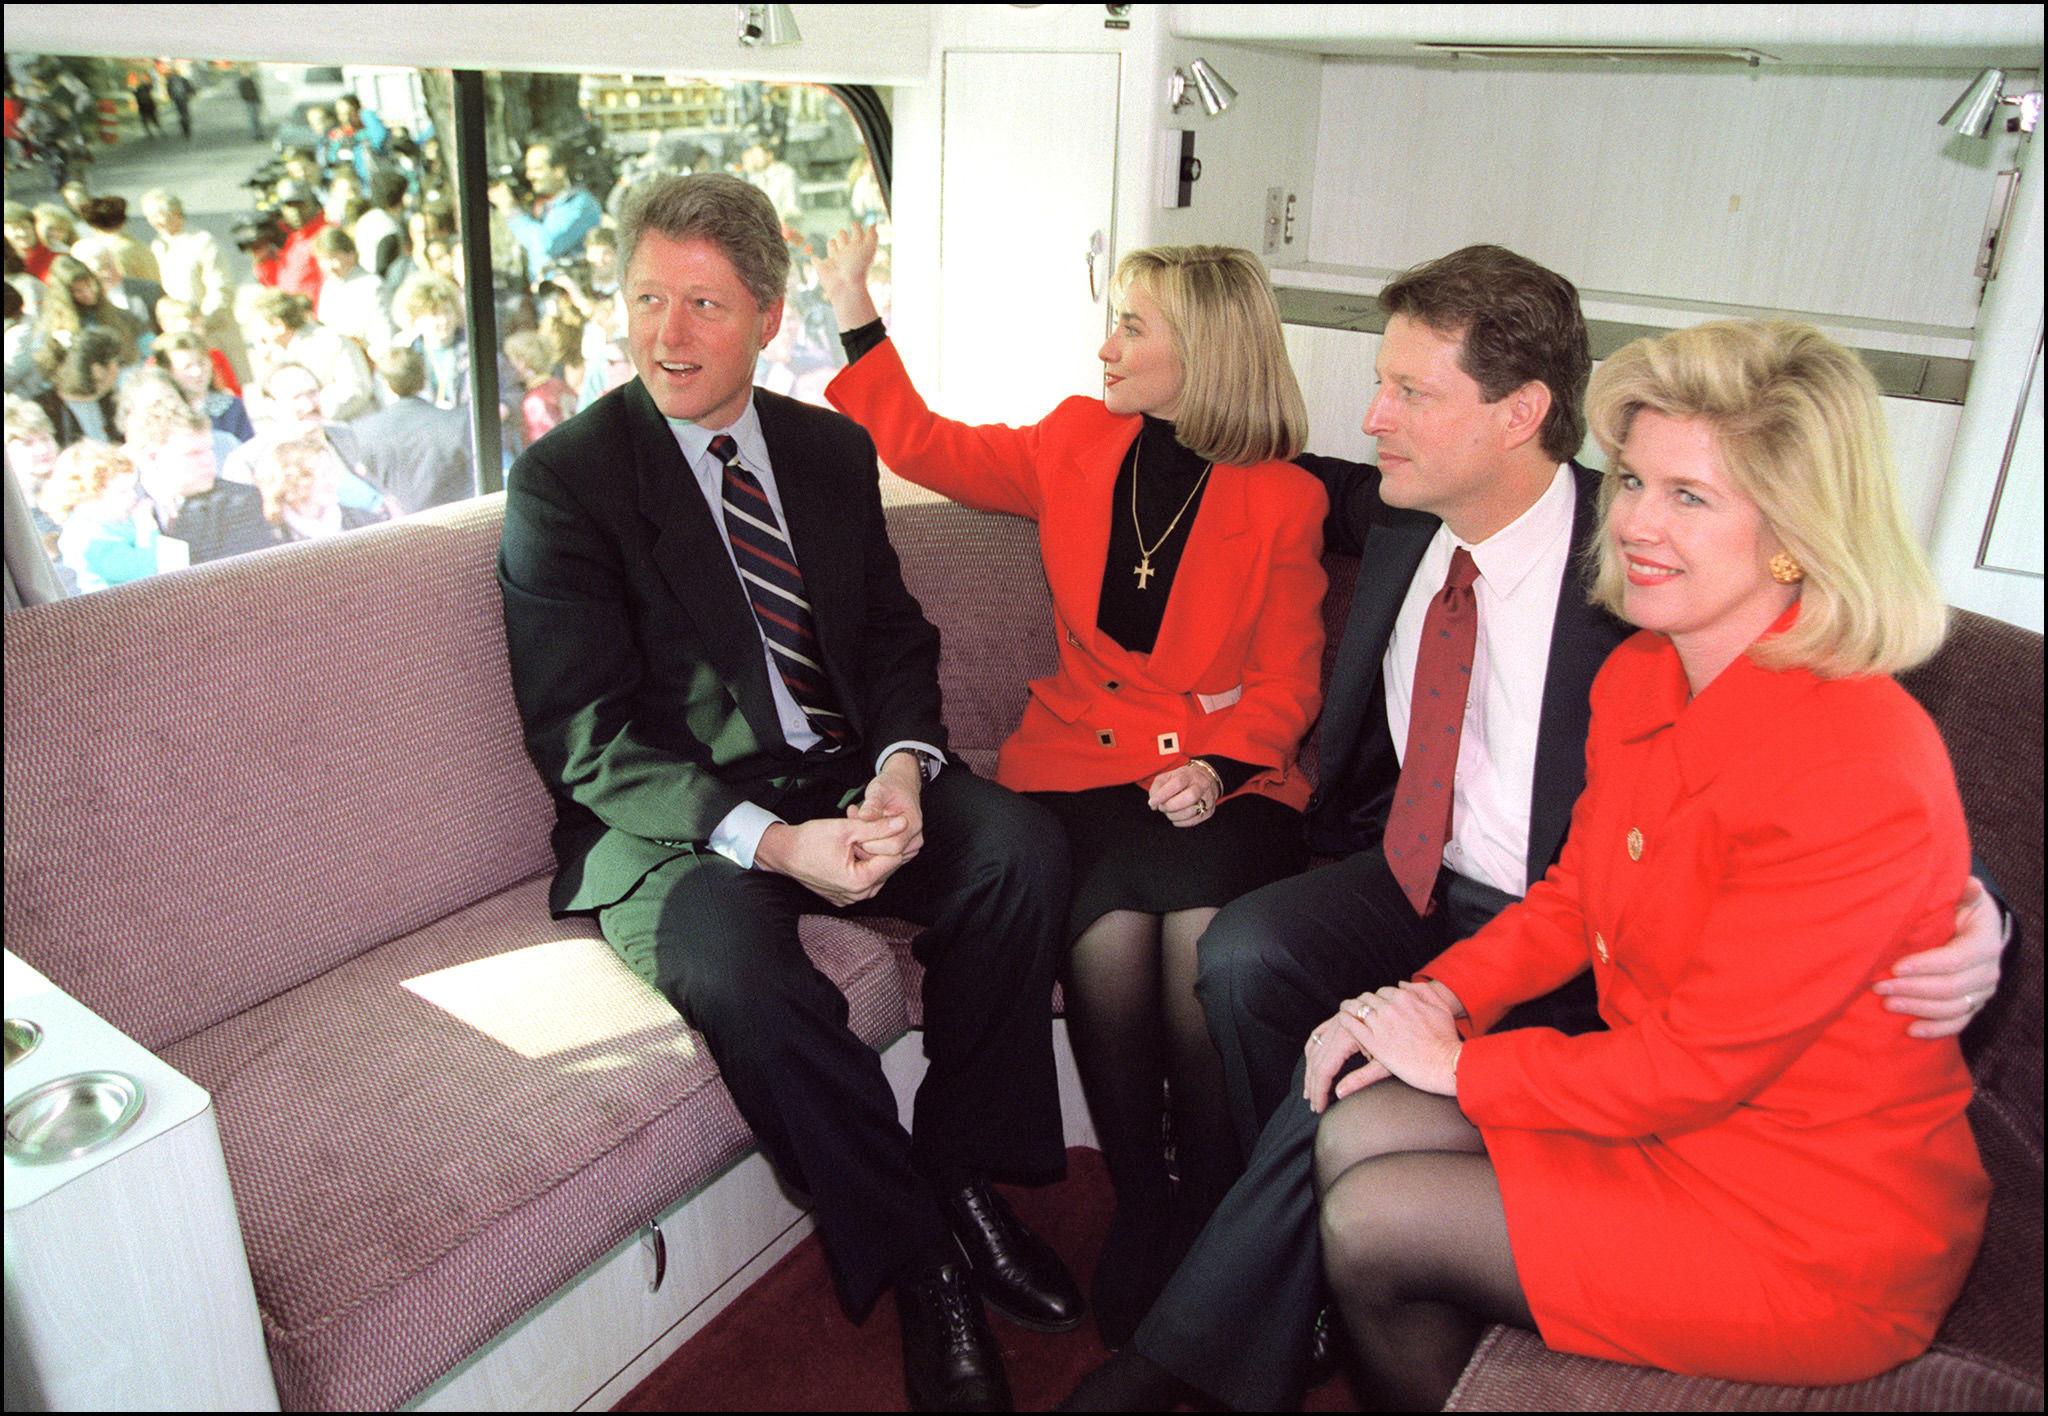 &#13;
‘Who would have thought, in 1992, that it would be the Gores who would be divorced by now and not the Clintons?’ &#13;